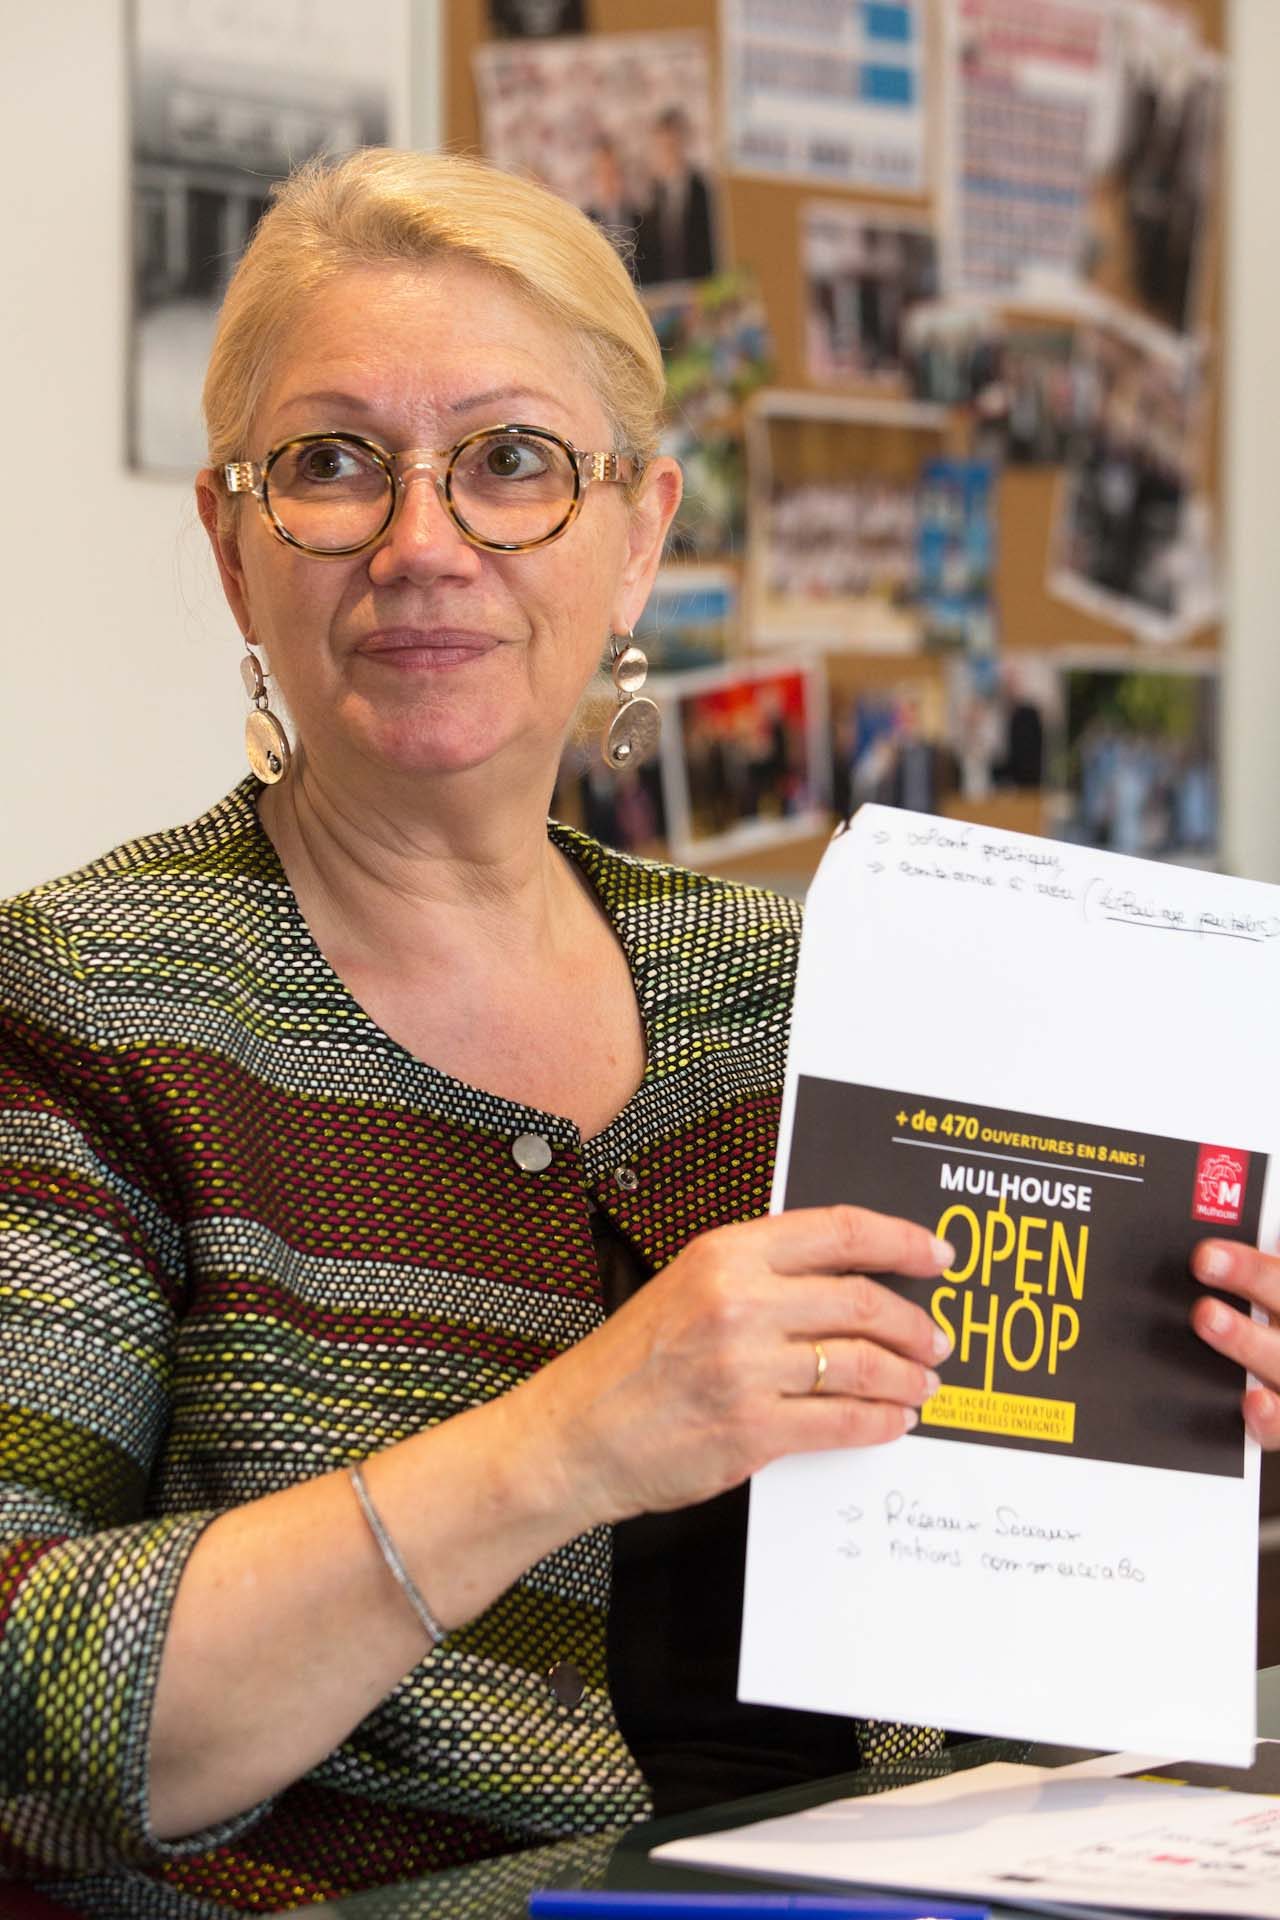 In her town hall office, the mayor, Michèle Lutz, who once ran a hair salon in Mulhouse, says the town must now move into a second phase where the vibrancy of the centre extends to the surrounding neighbourhoods. “The town centre is buzzing now, but we can’t just concentrate on the small central perimeter, nor simply on shops – there has to be a vision of the town as a whole,” she says.